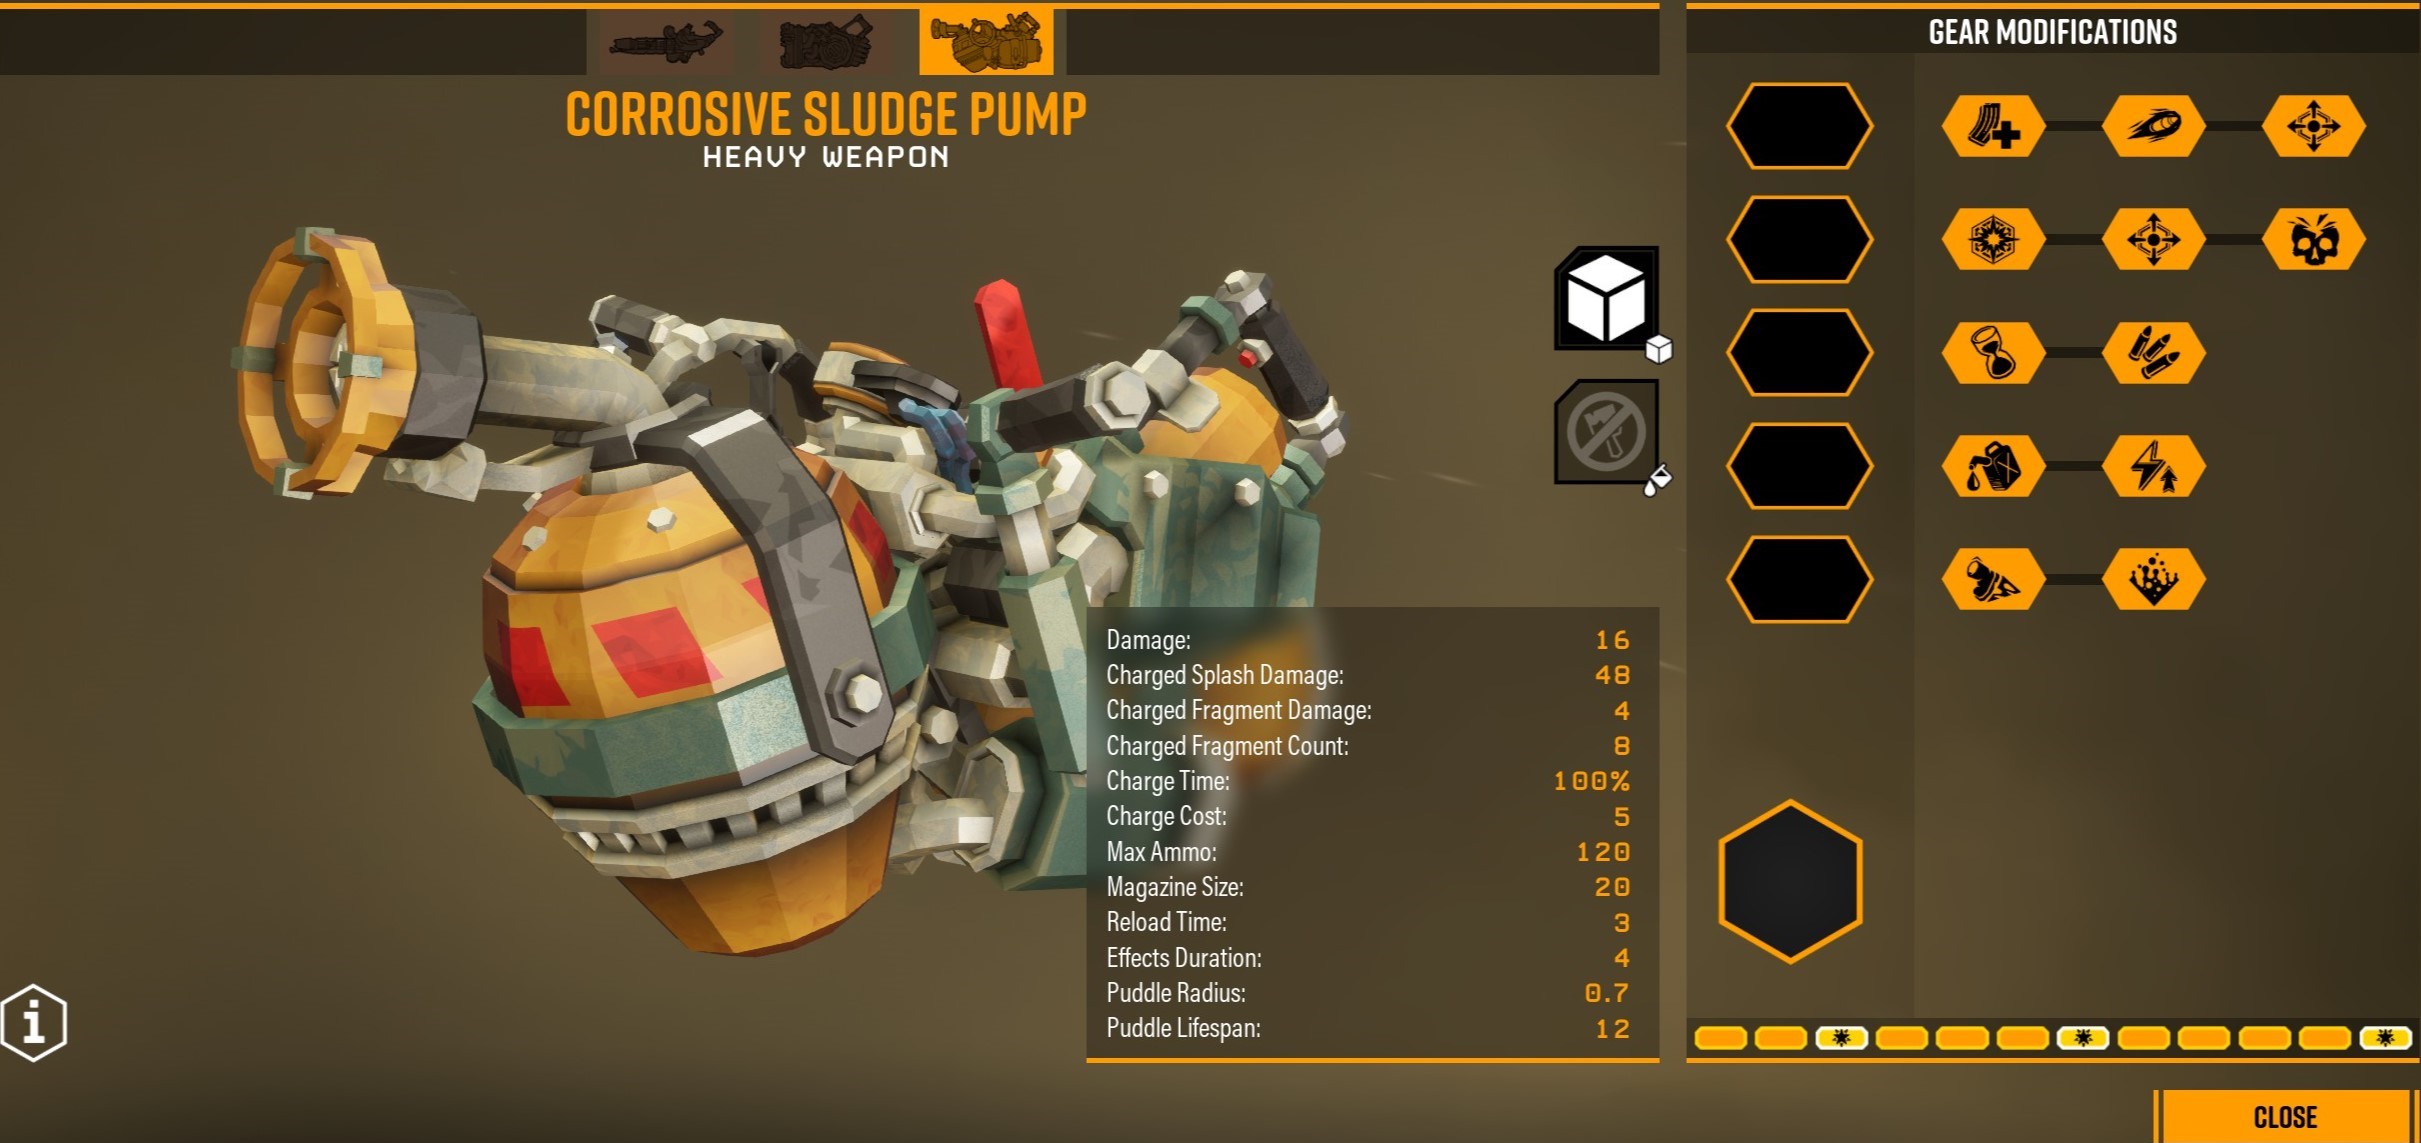 Steam Community :: Guide :: Syringe's Guide to Deep Rock Galactic